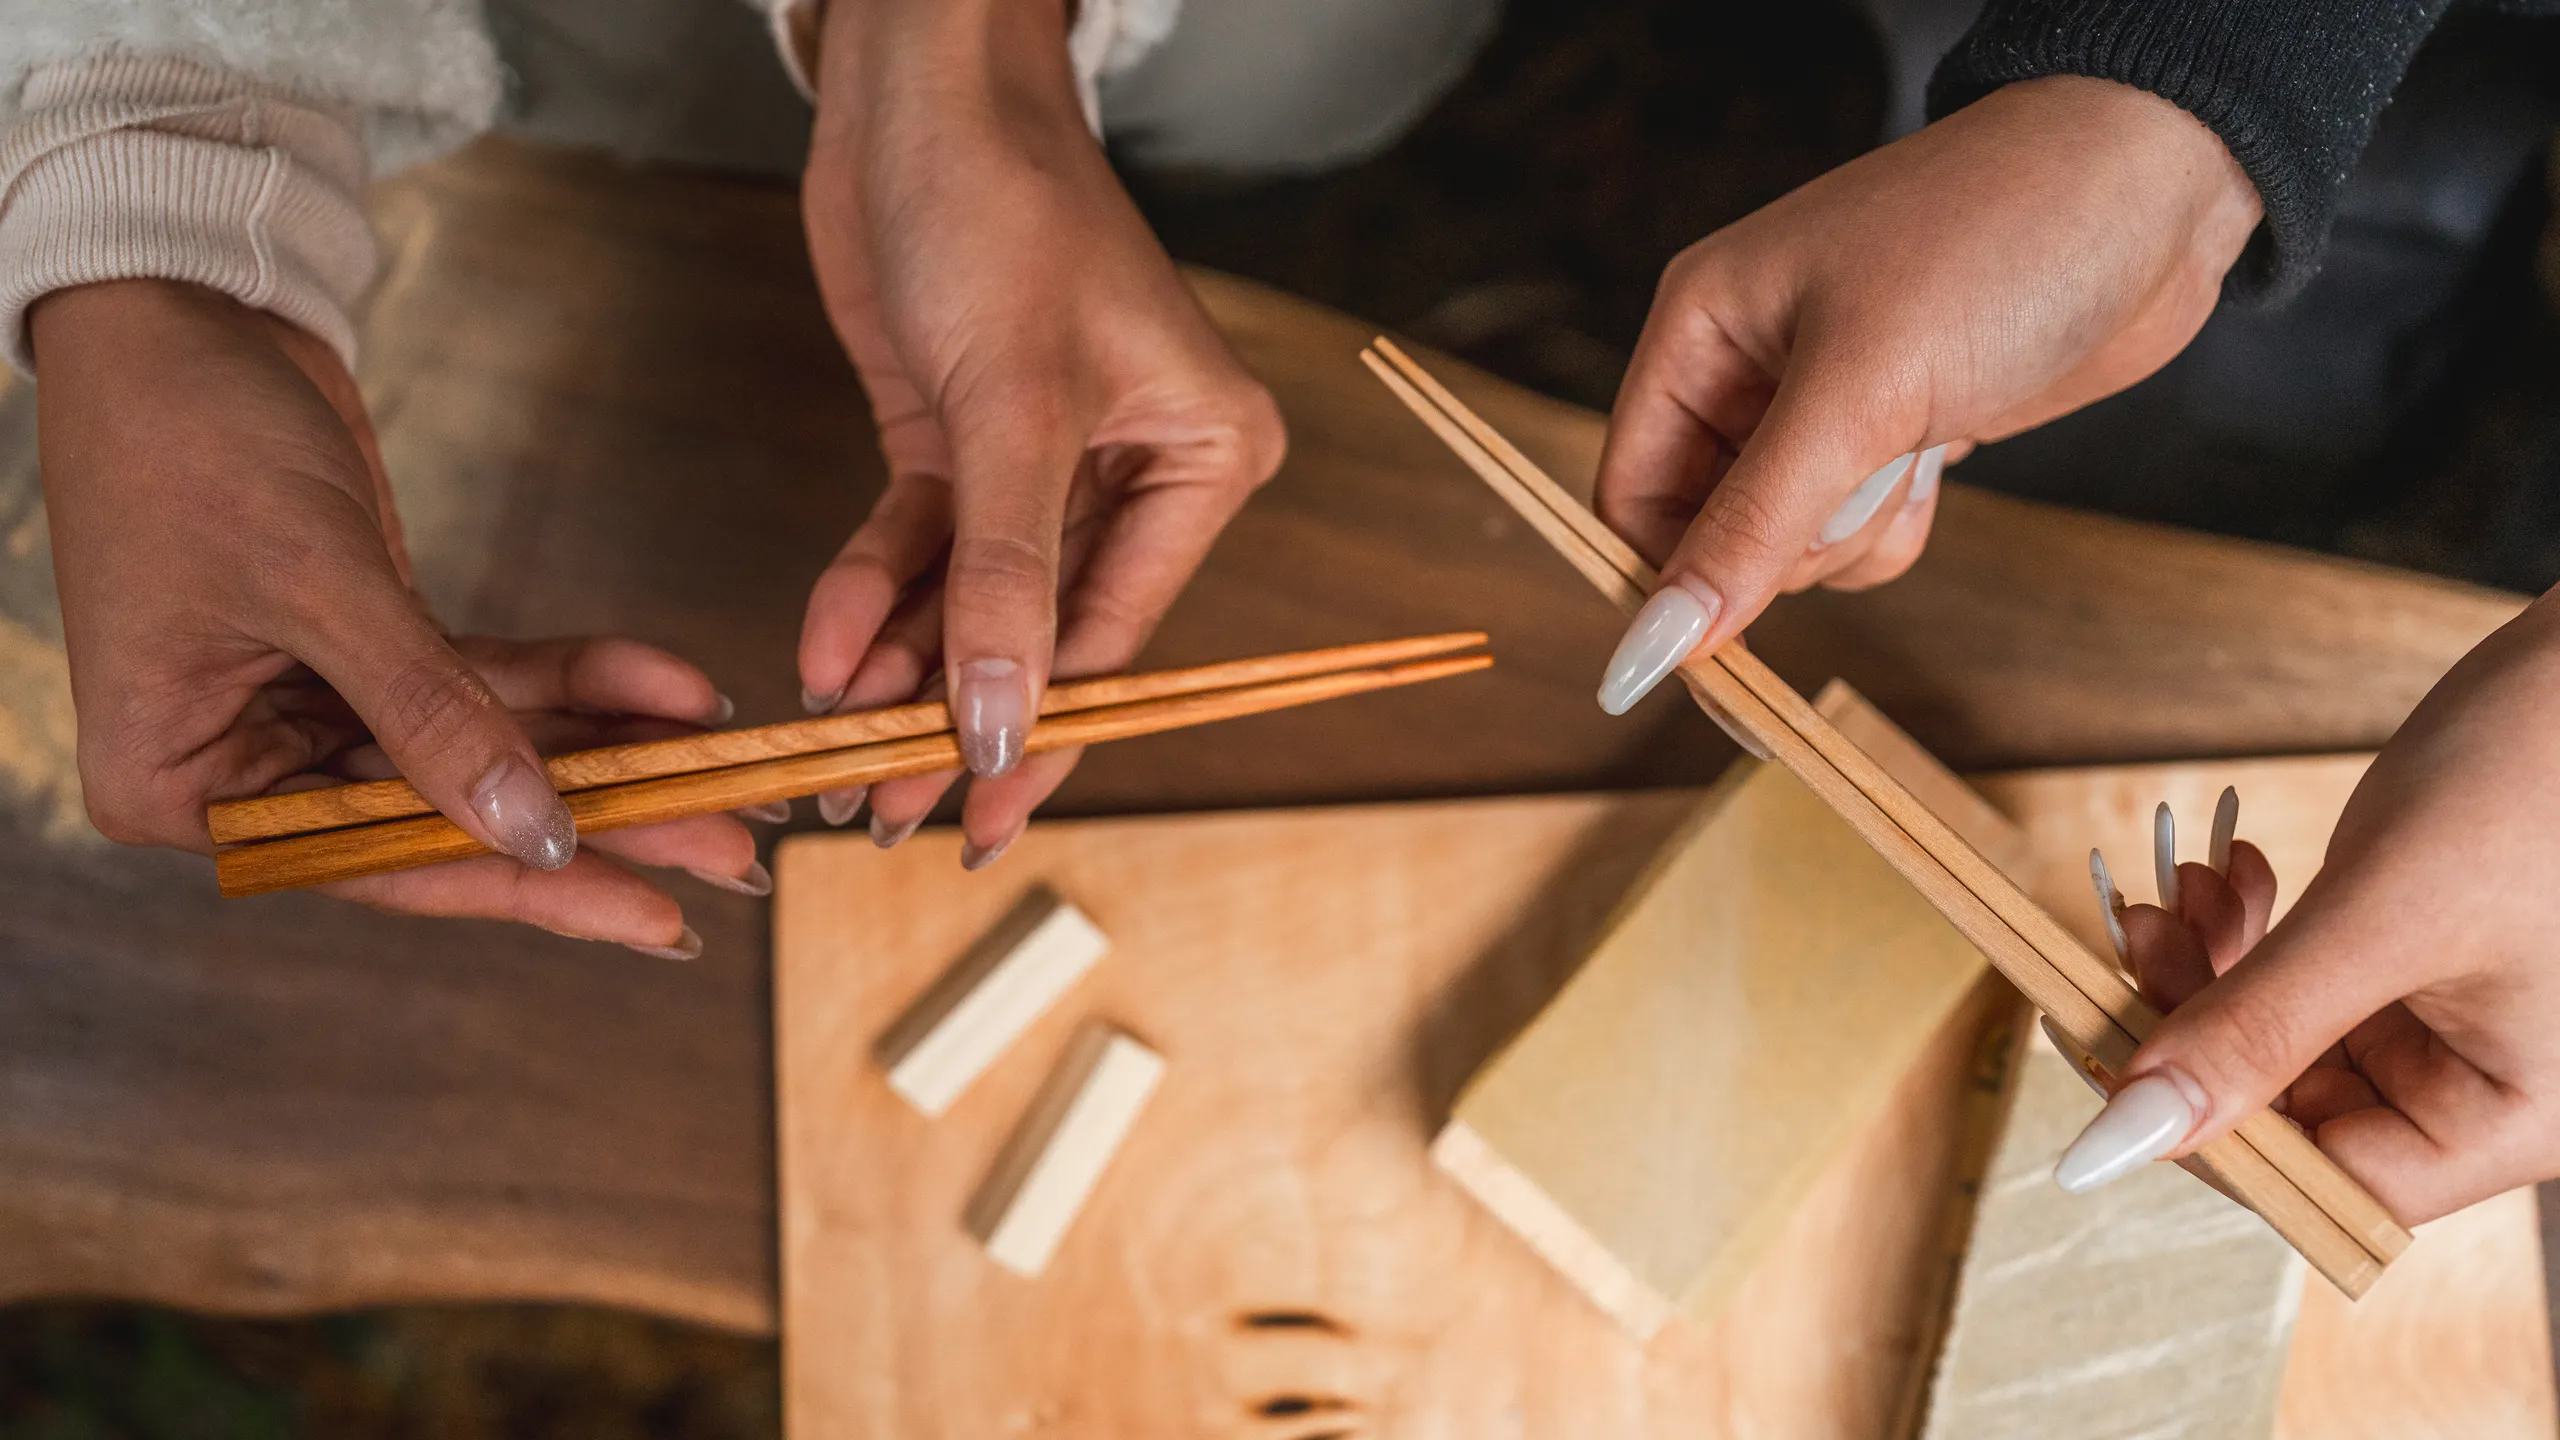 Premium lumbering experience and craft yourown wooden chopsticks